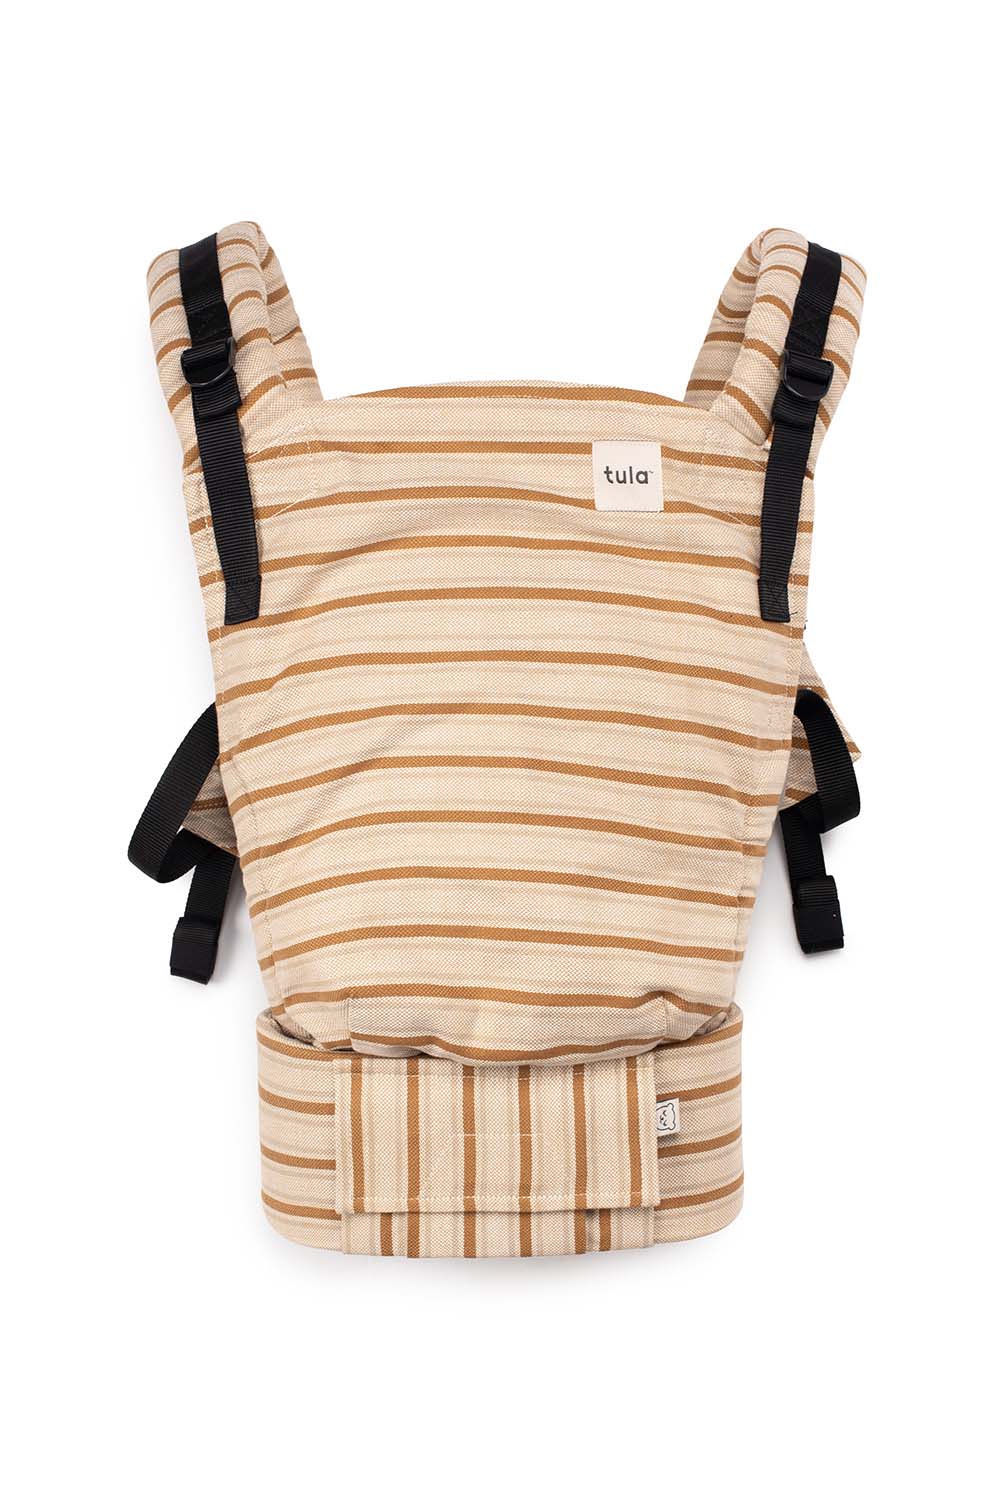 Latte - Signature Handwoven Free-to-Grow Baby Carrier